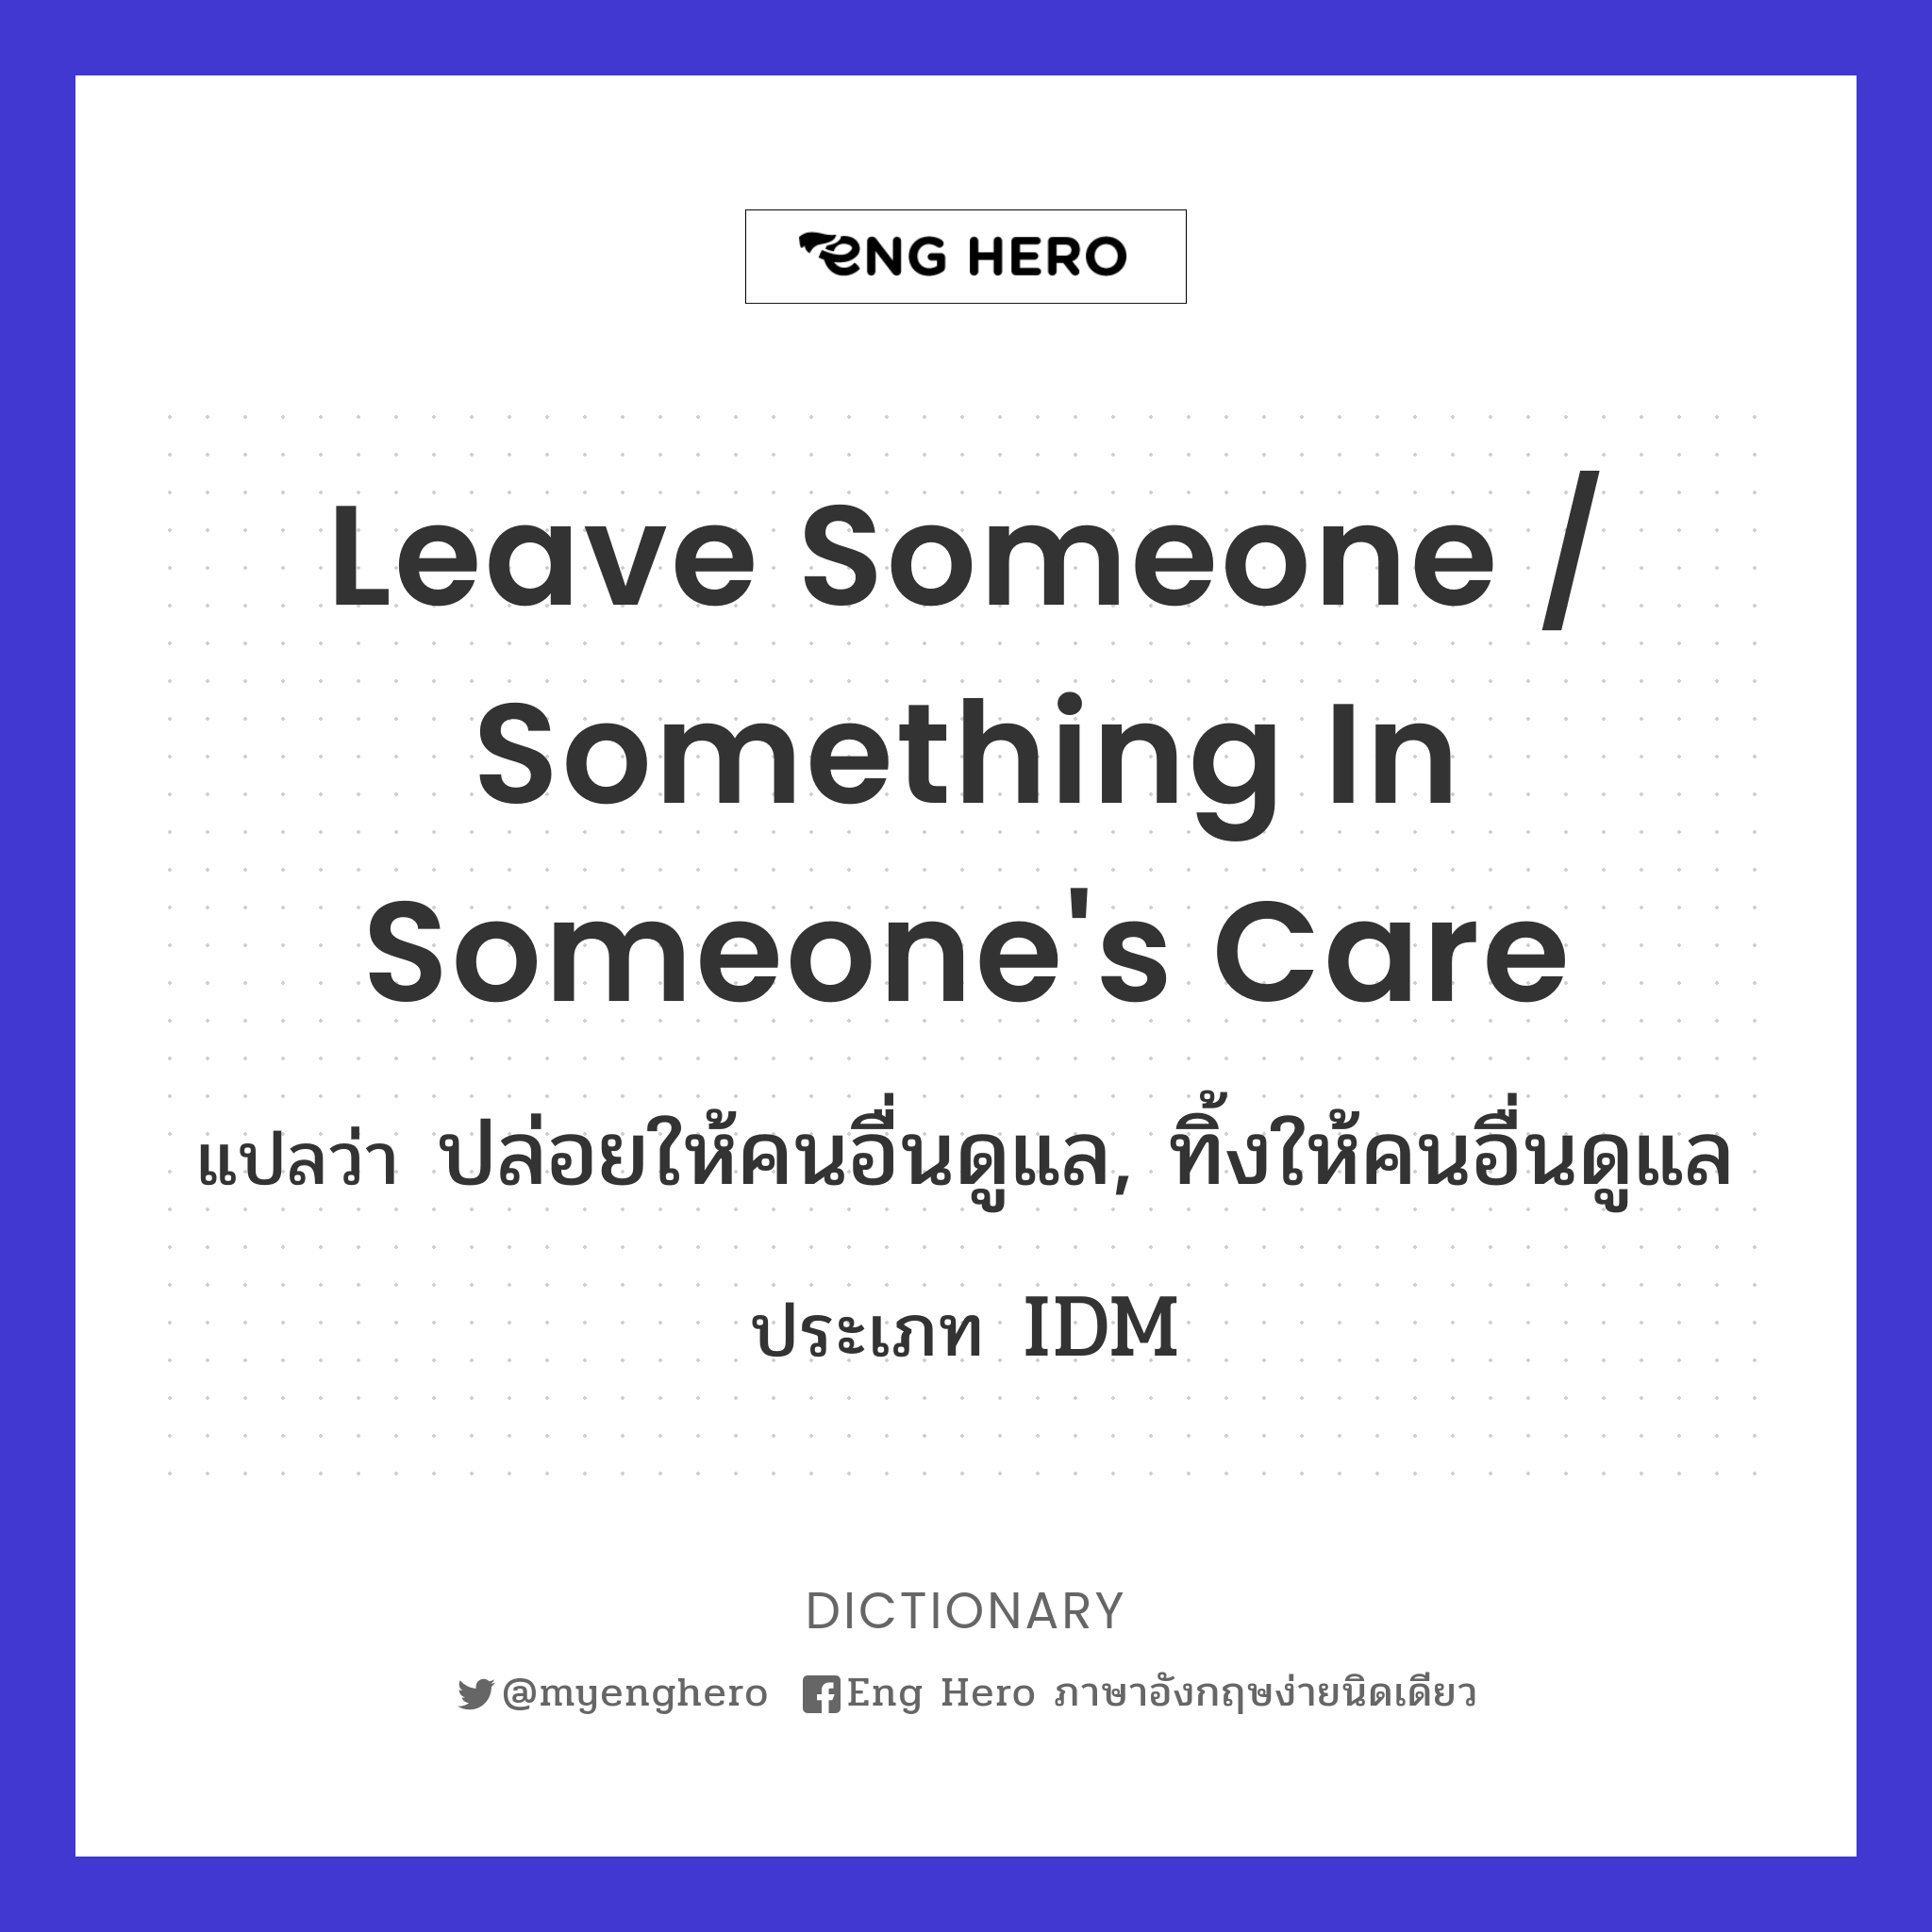 leave someone / something in someone's care